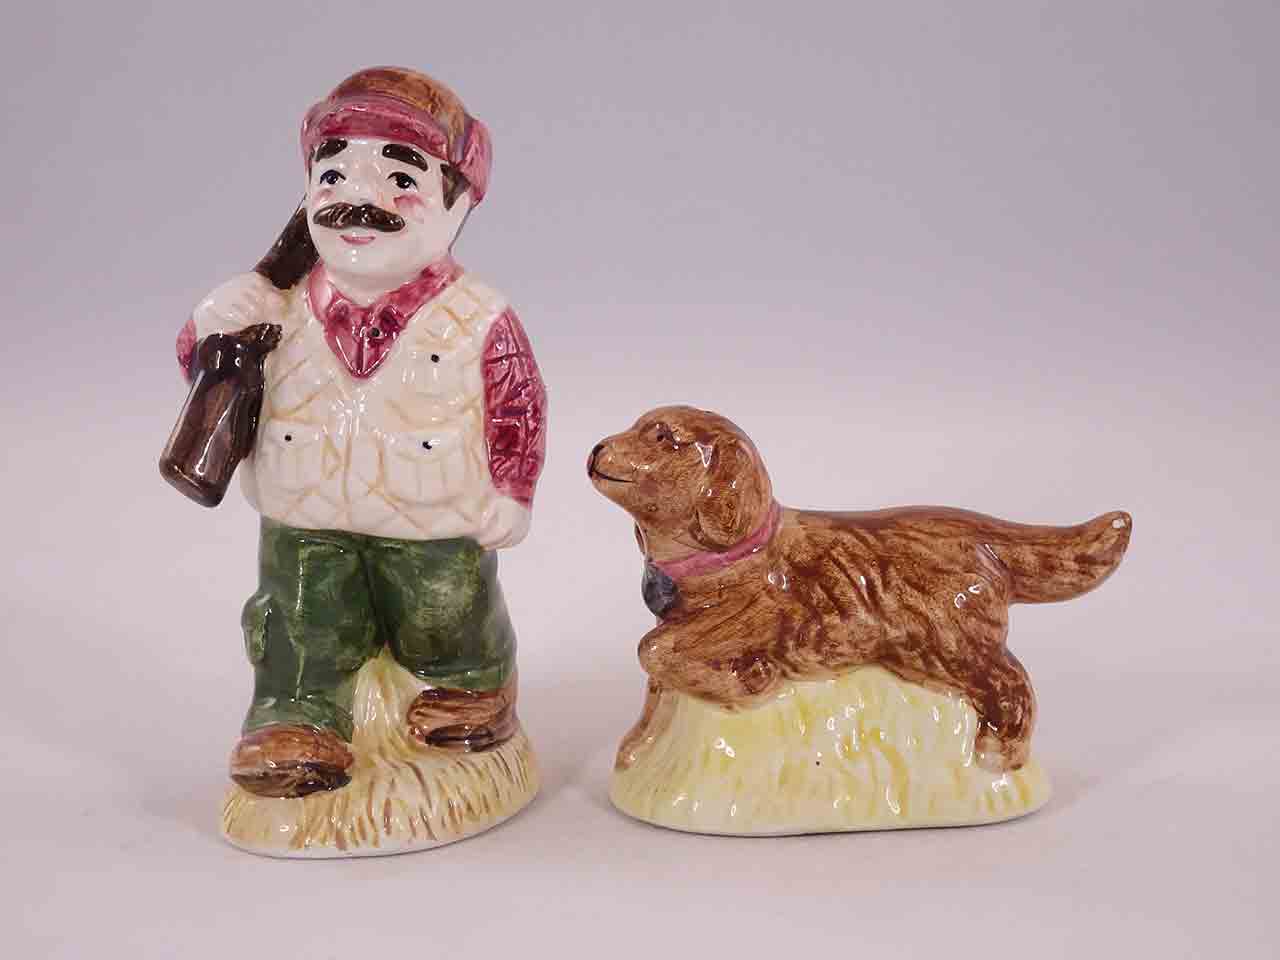 Series of men and their hobbies salt and pepper shakers - hunter